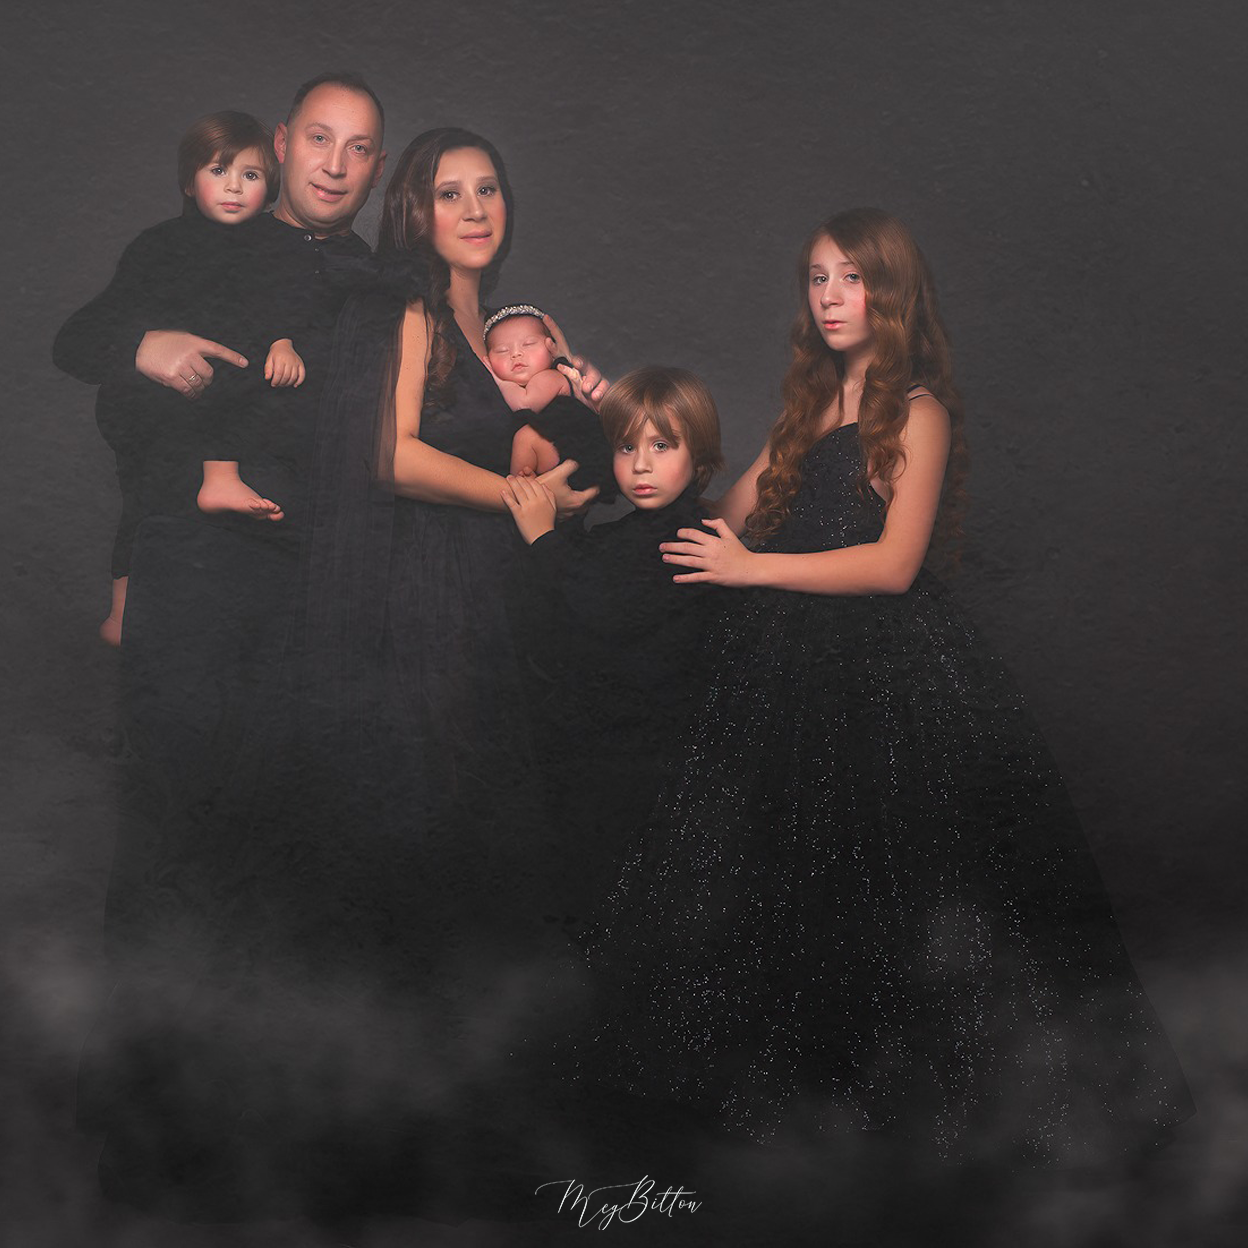 Looking In: A Family Studio Session - Meg Bitton Productions